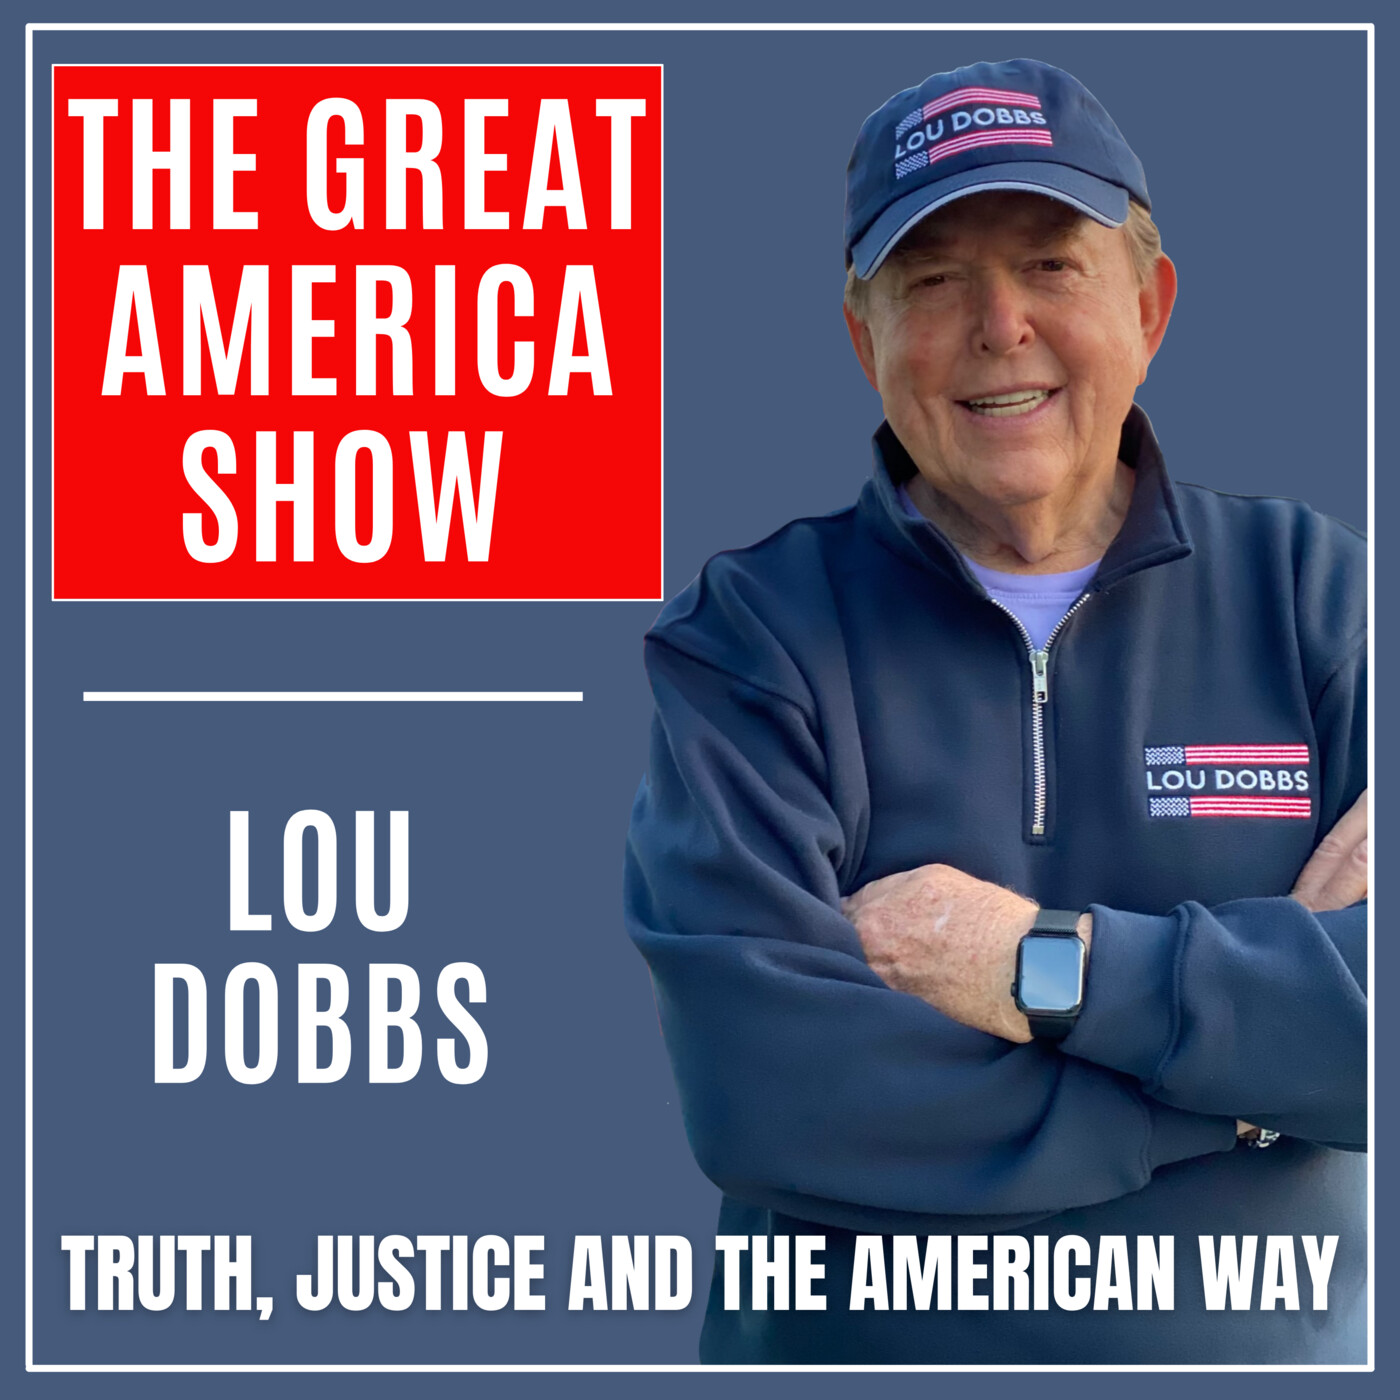 LOU DOBBS ON THE POLITICAL WEEK THAT WAS